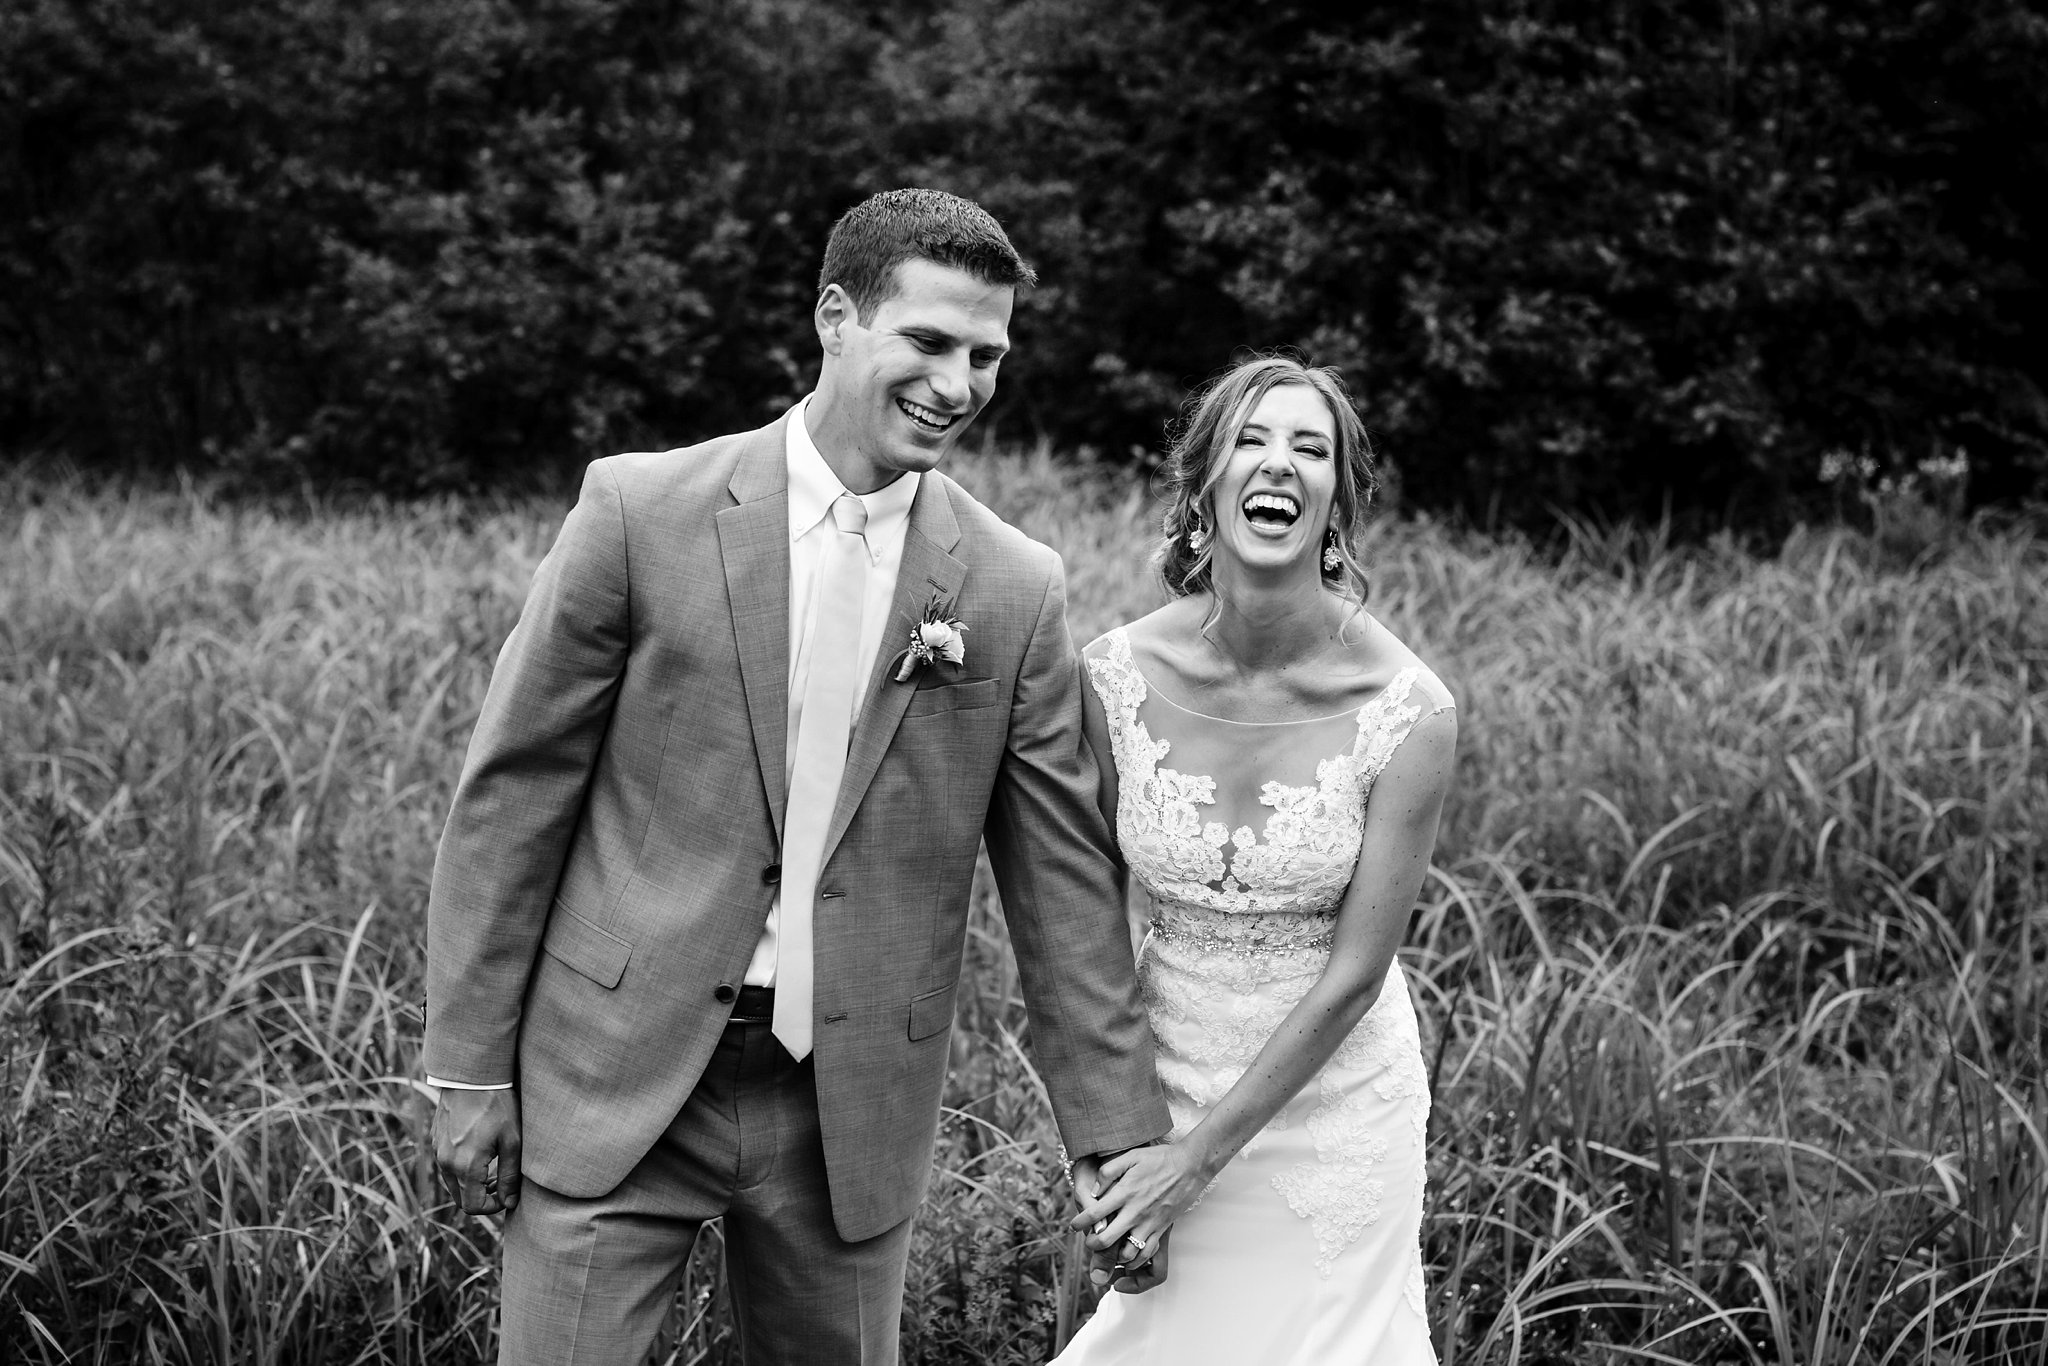 The newlyweds share a laugh before the wedding reception in the tall grass at their outdoor celebration